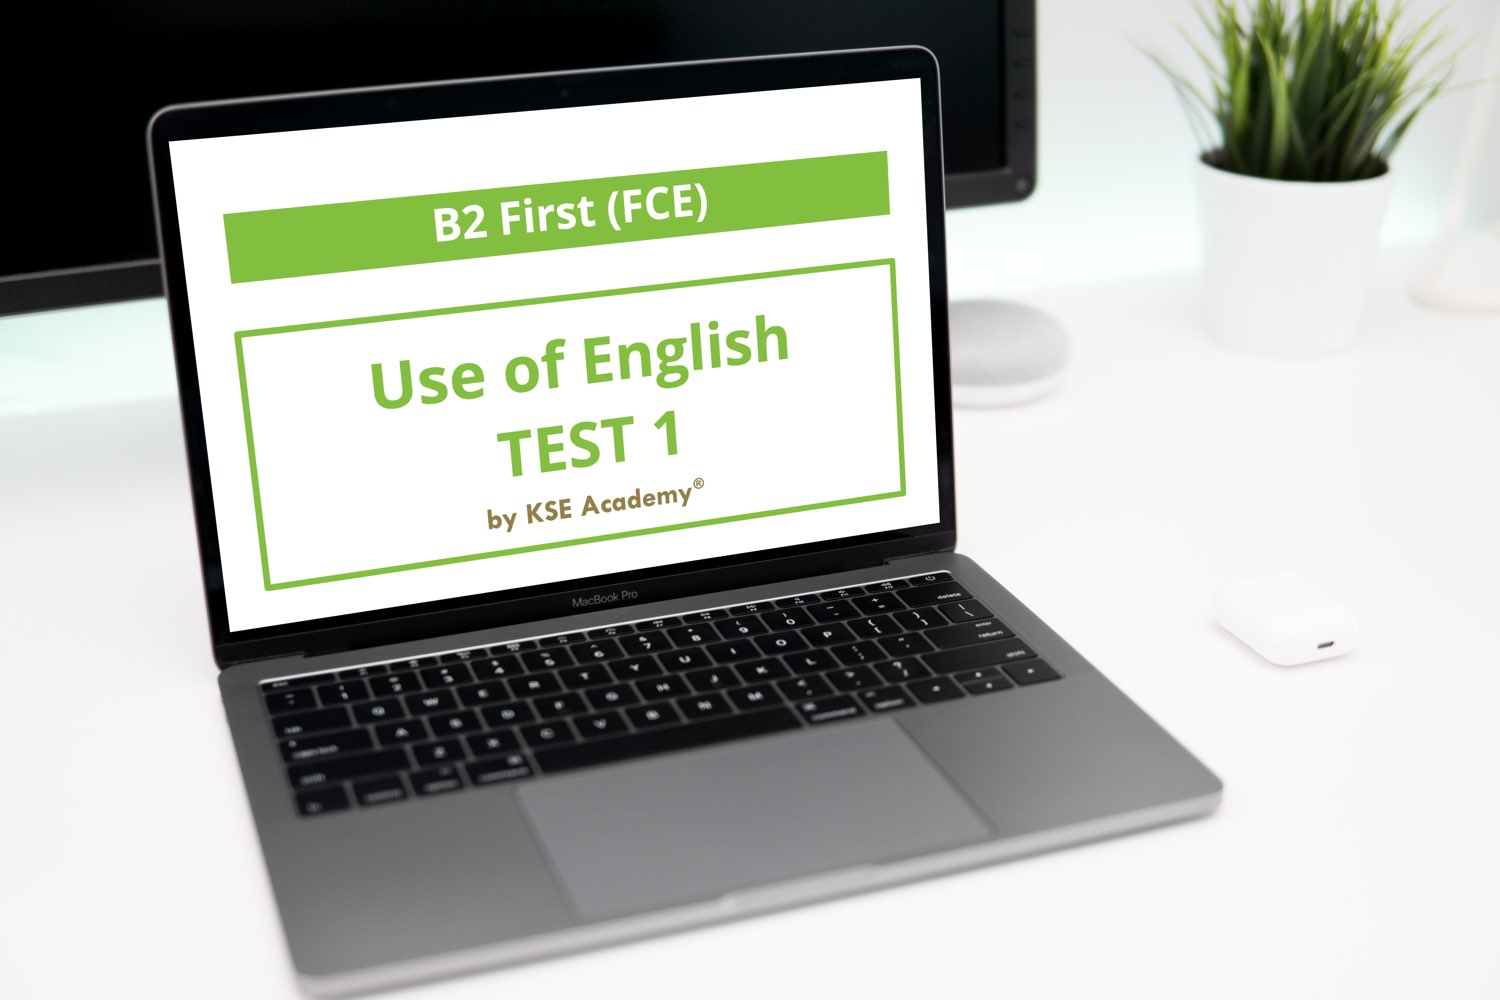 B2 First (FCE): Use of English Test 1